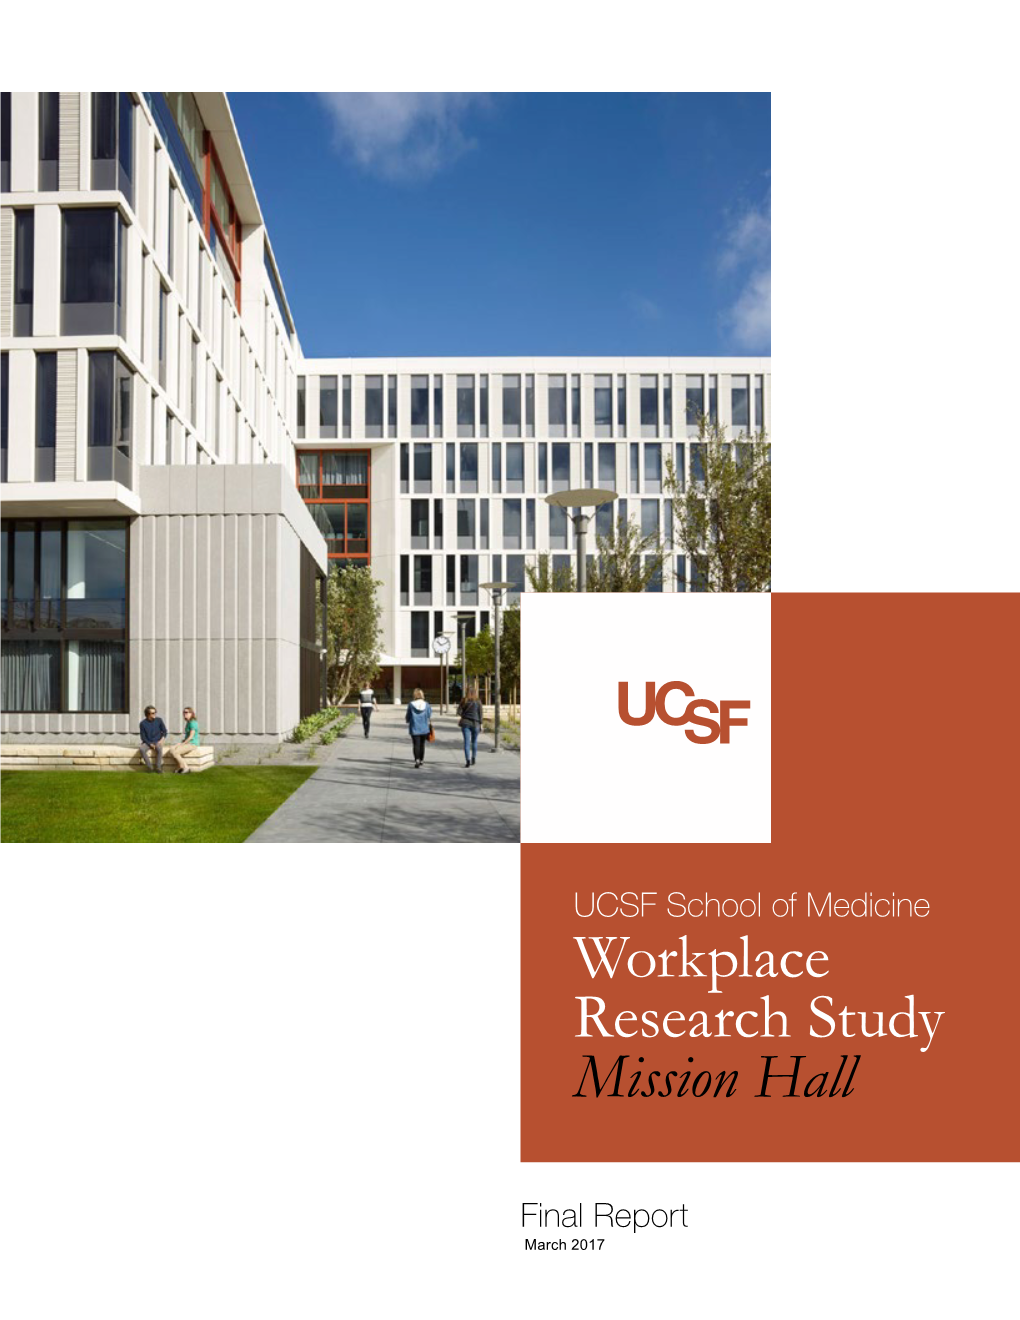 Workplace Research Study Mission Hall